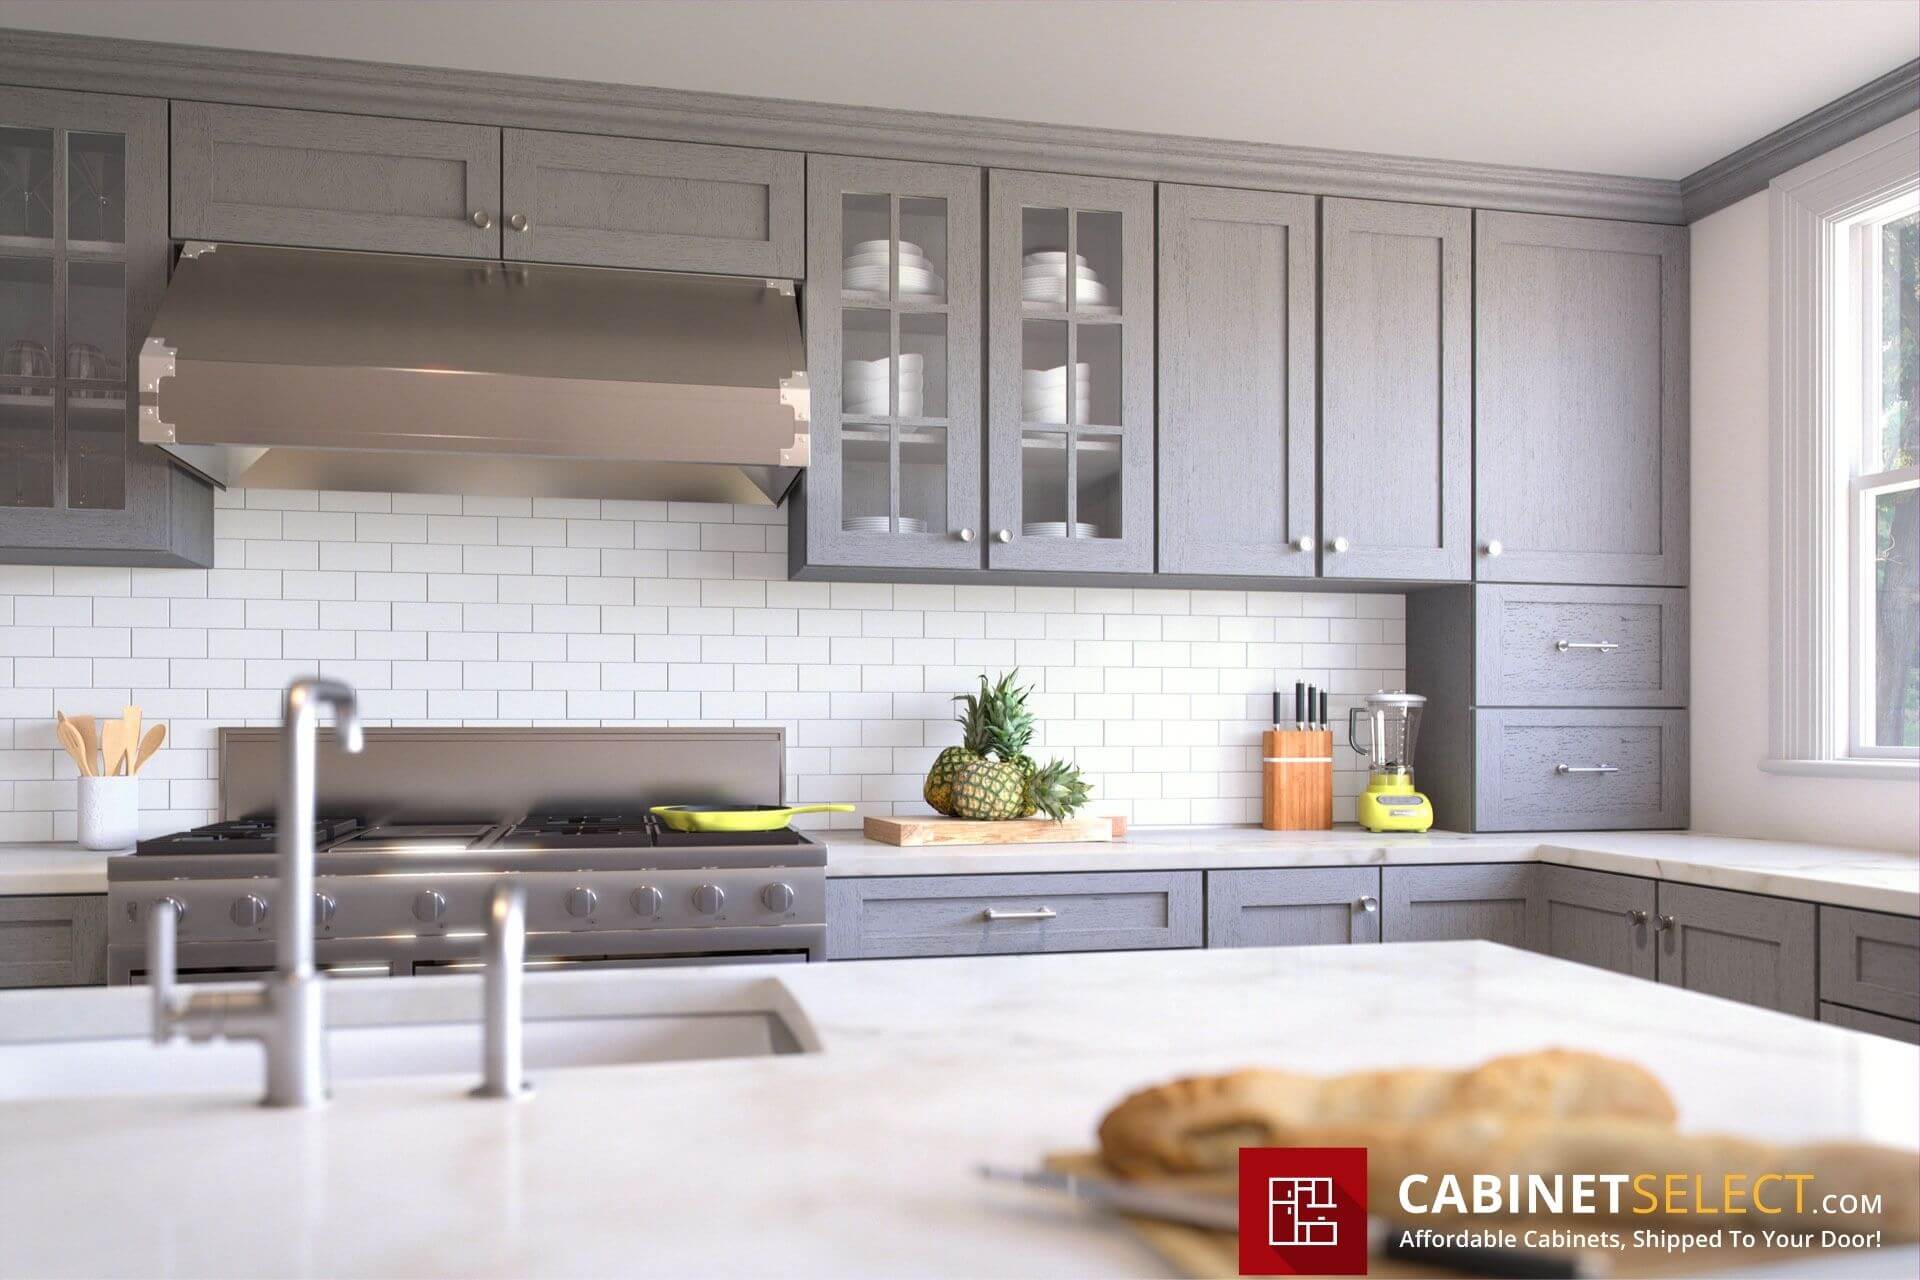 https://cabinetselect.com/cswp/wp-content/uploads/2021/07/Feature-Image-Reorganize-Your-Kitchen-1.jpg